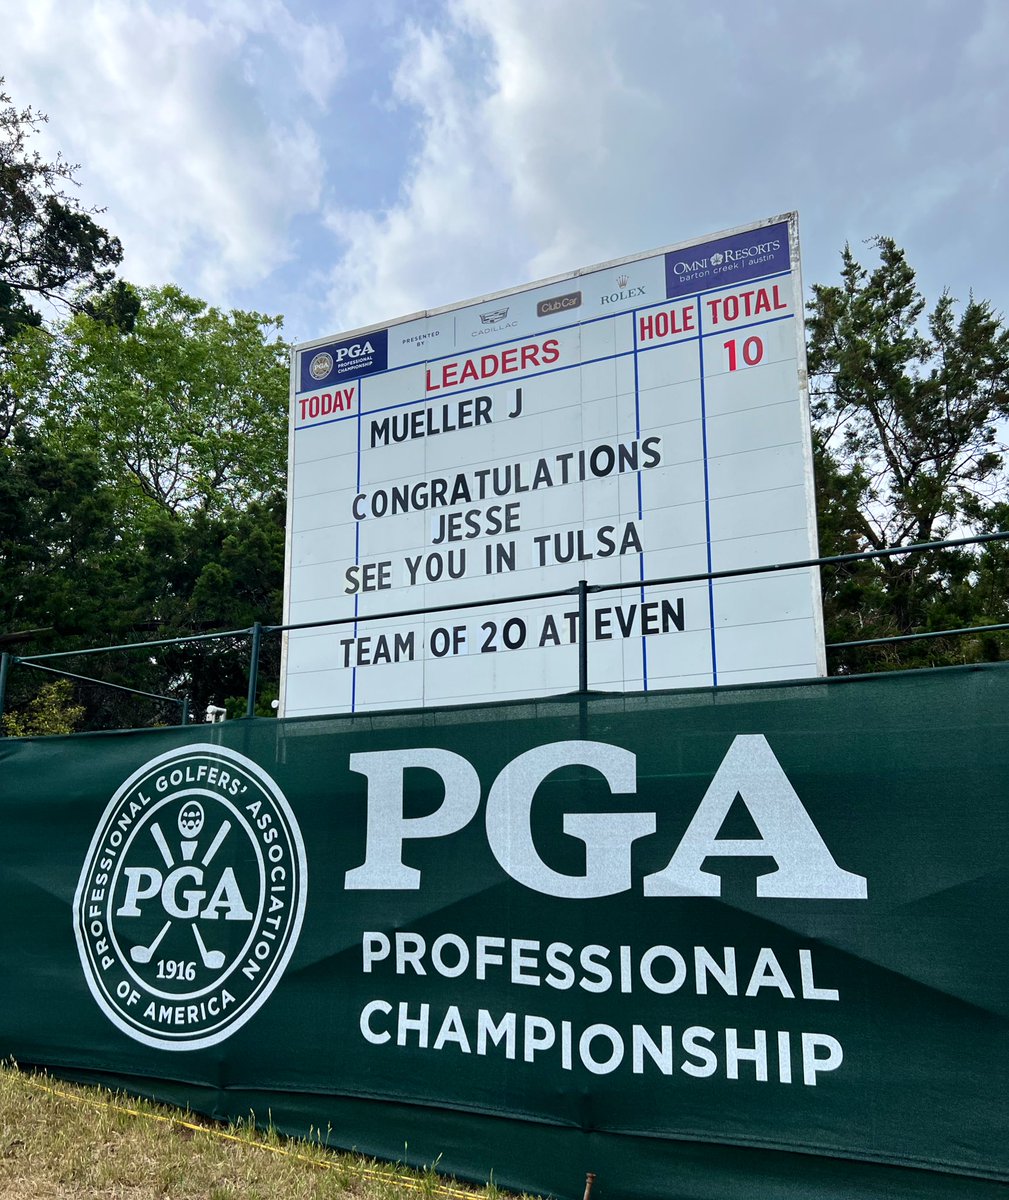 It’s Mueller Time! The @SWSectionPGA’s Jesse Mueller is your 2022 @PGA Professional Champion, winning by an impressive five shots at -10. He’ll lead the Team of 20 PGA Members who punched a ticket at @OmniBartonCreek to the @PGAChampionship next month! #PGAProChamp